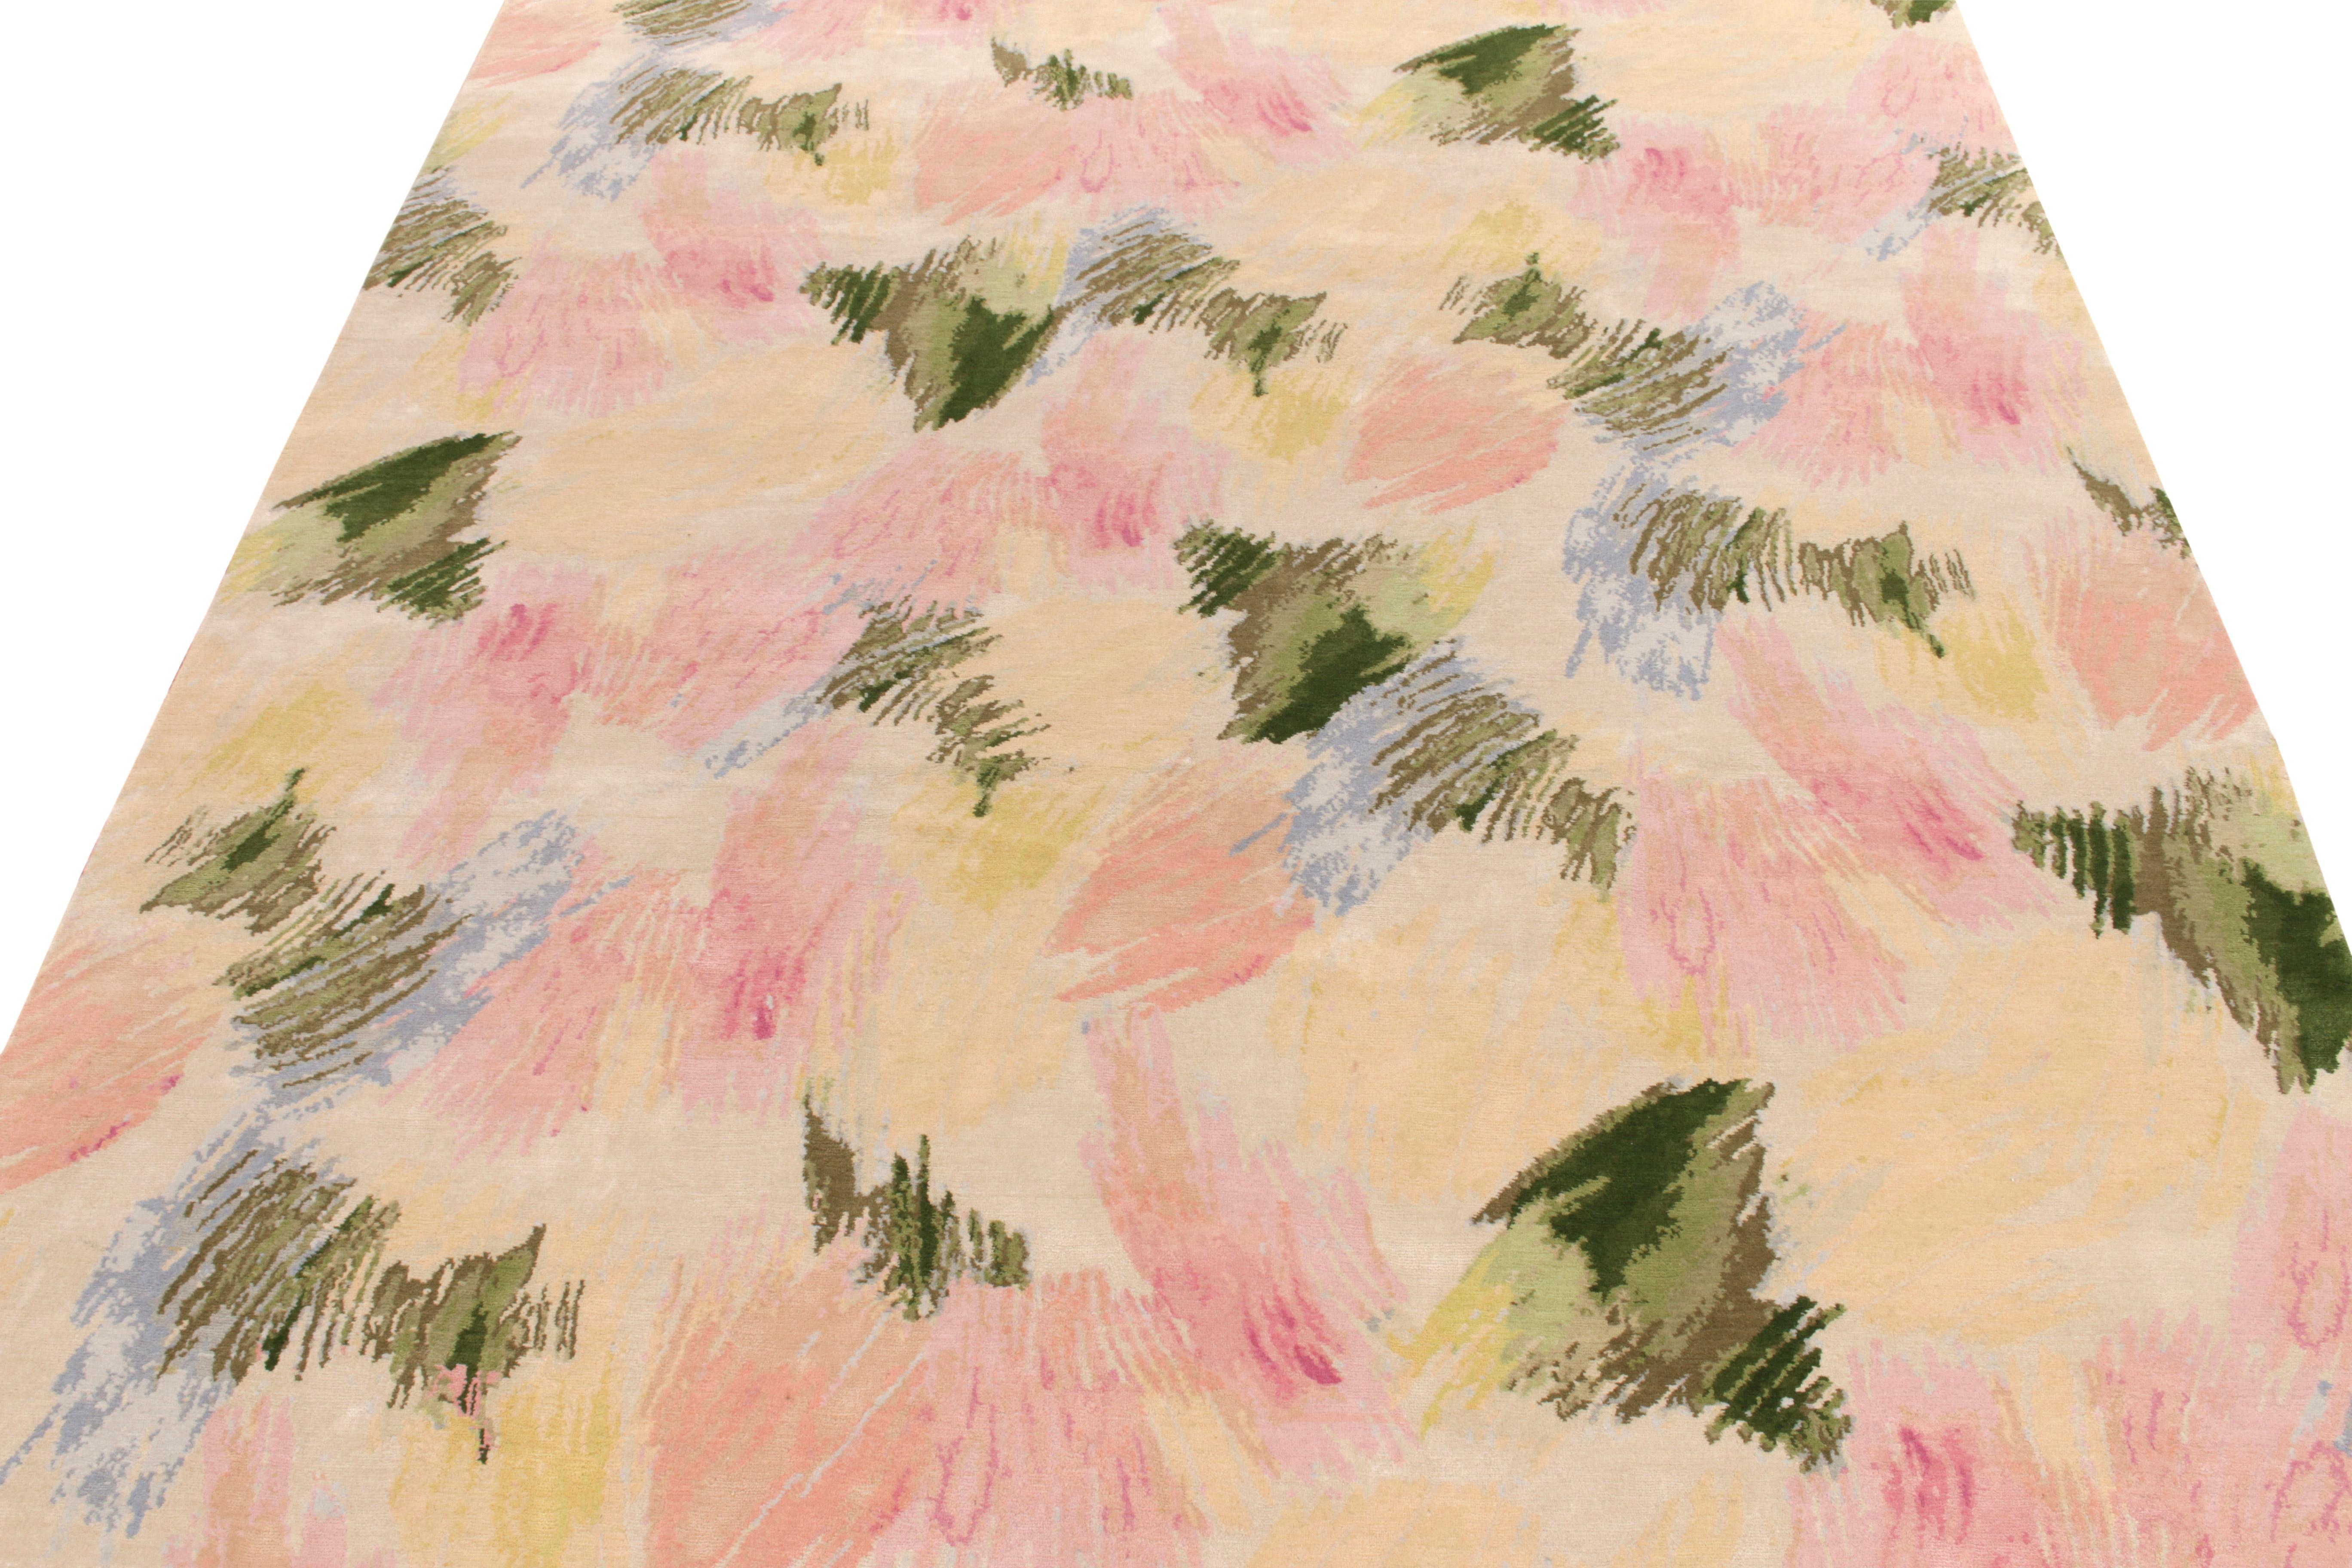 An 8 x 10 modern rug from the abstract styles in Rug & Kilim’s New & Modern Collection. Hand-knotted in wool and silk, this brushstrokes homage enjoys floral tones of pastel pink & blue, green, salmon accompanying the artisan style on a garden